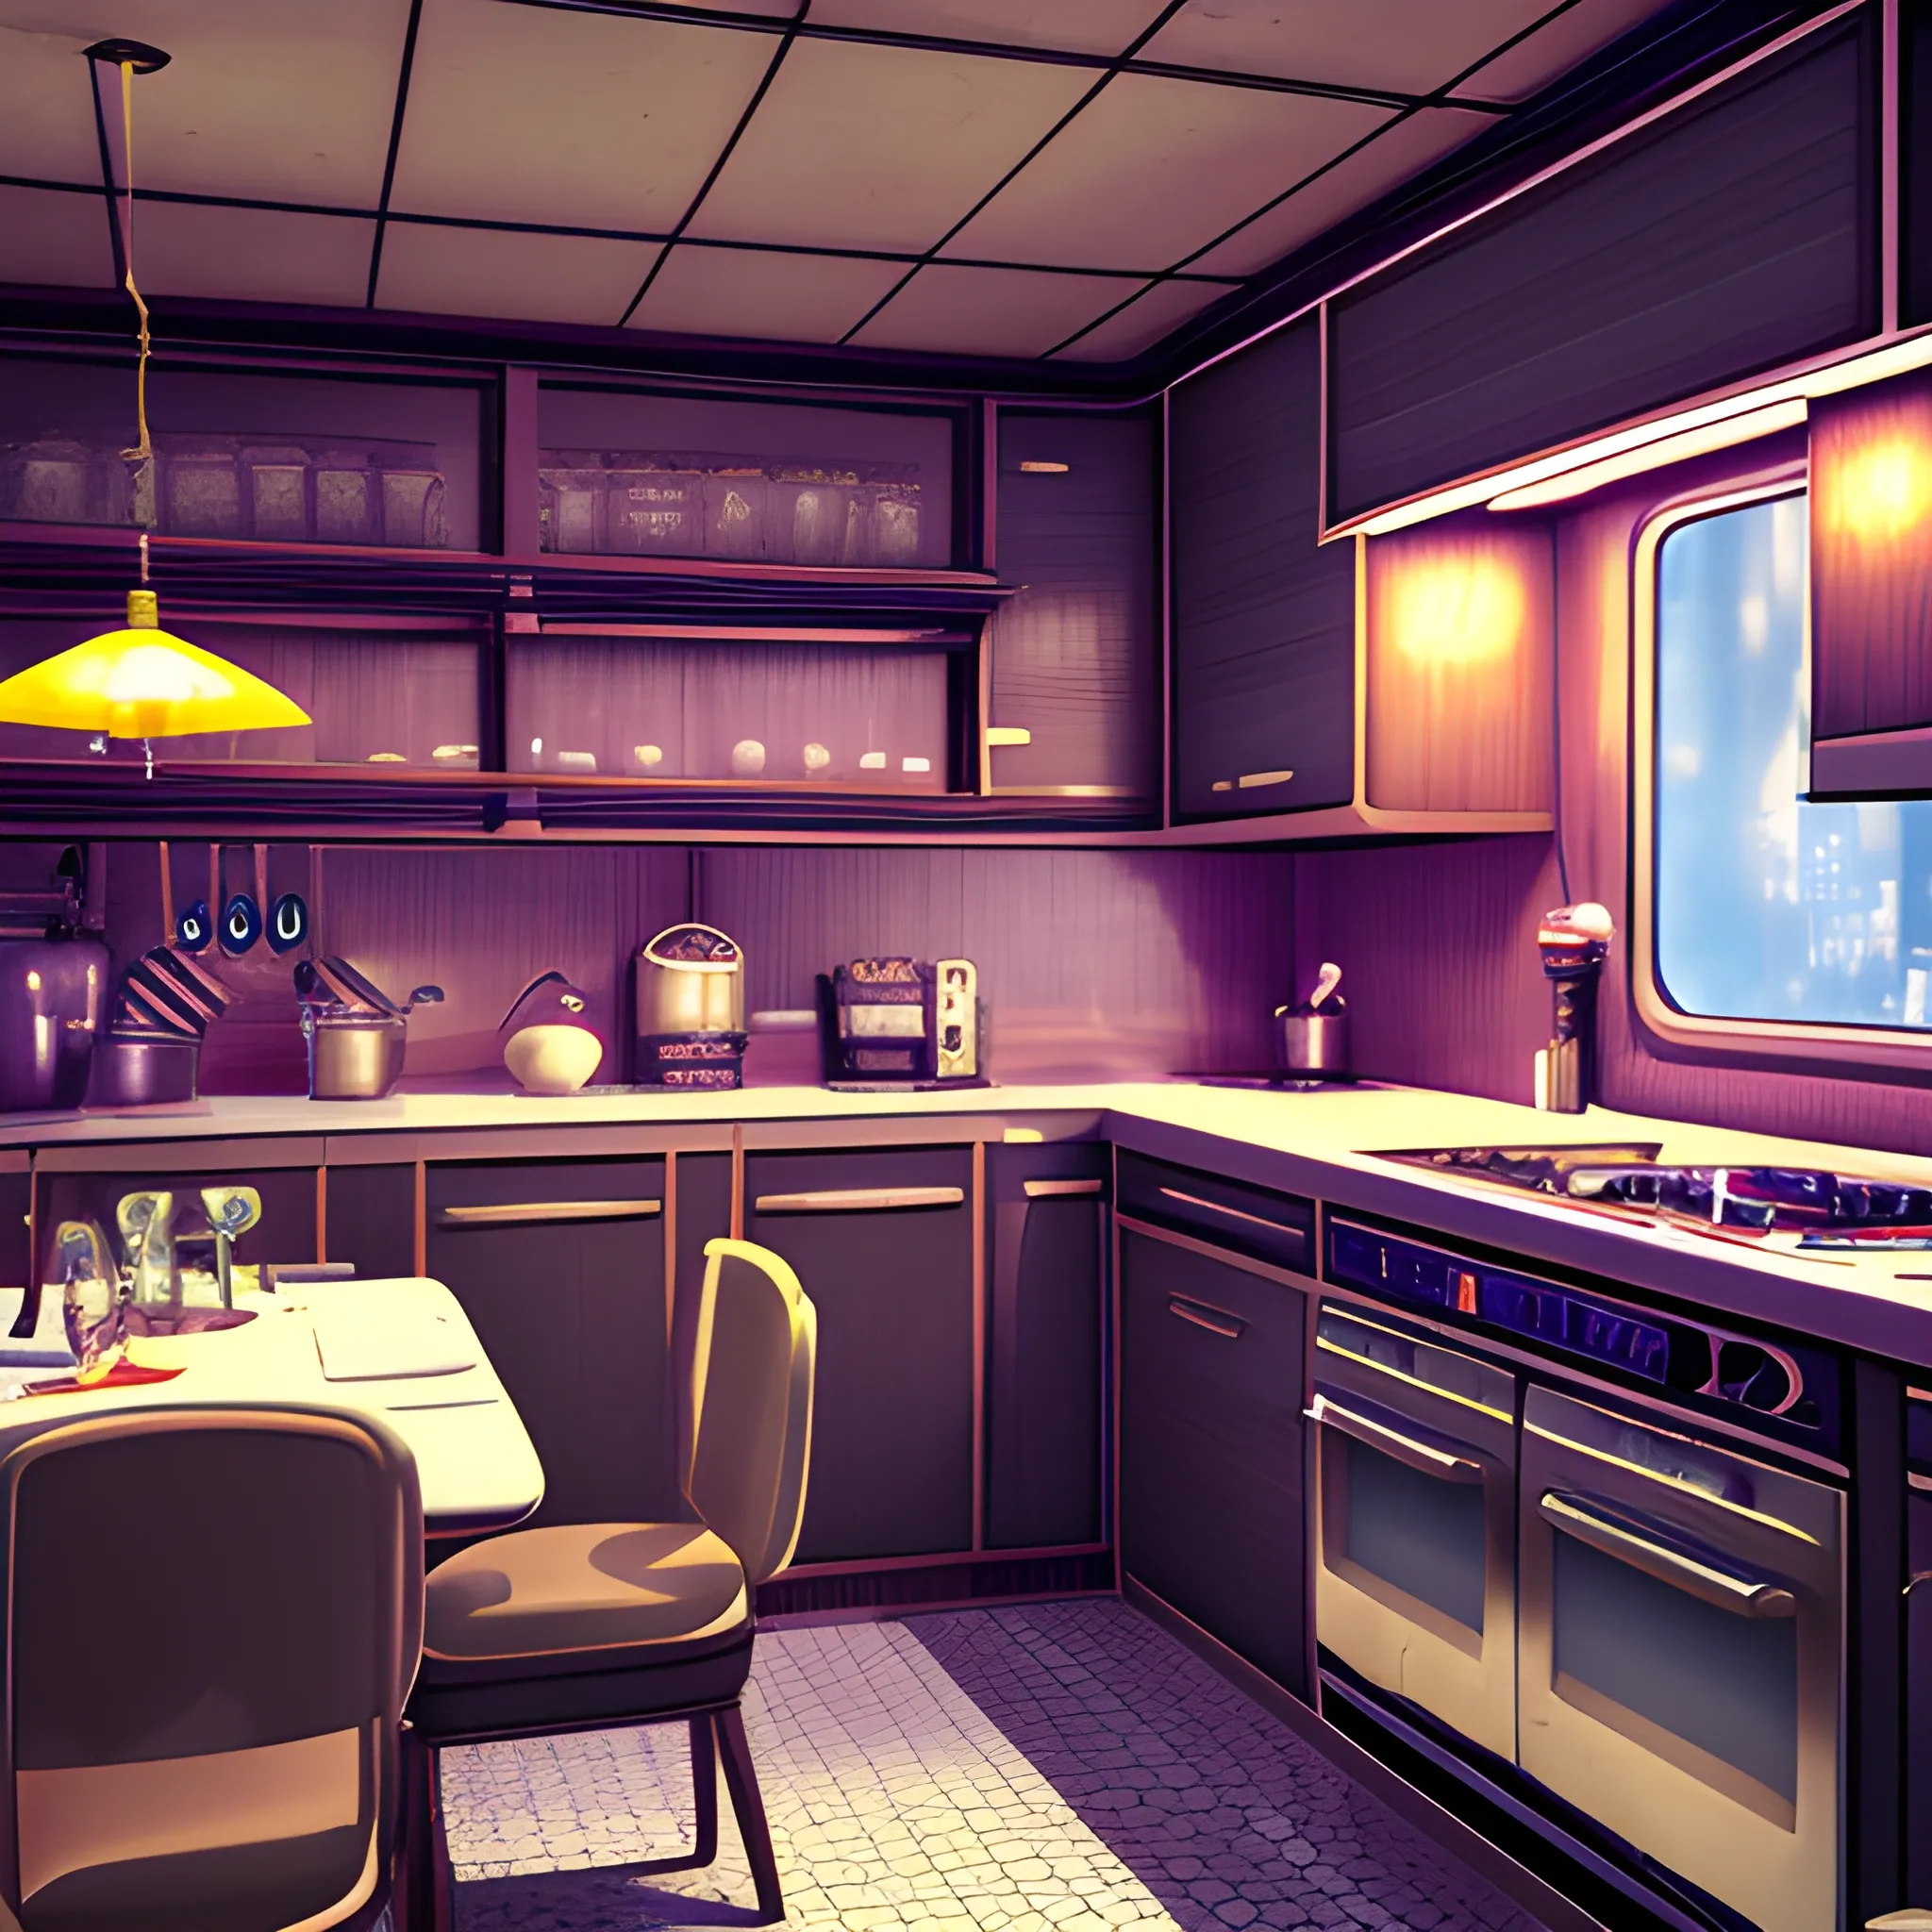 Kitchen, fancy dinner, retro futuristic, highly detailed, realistic, 4k 